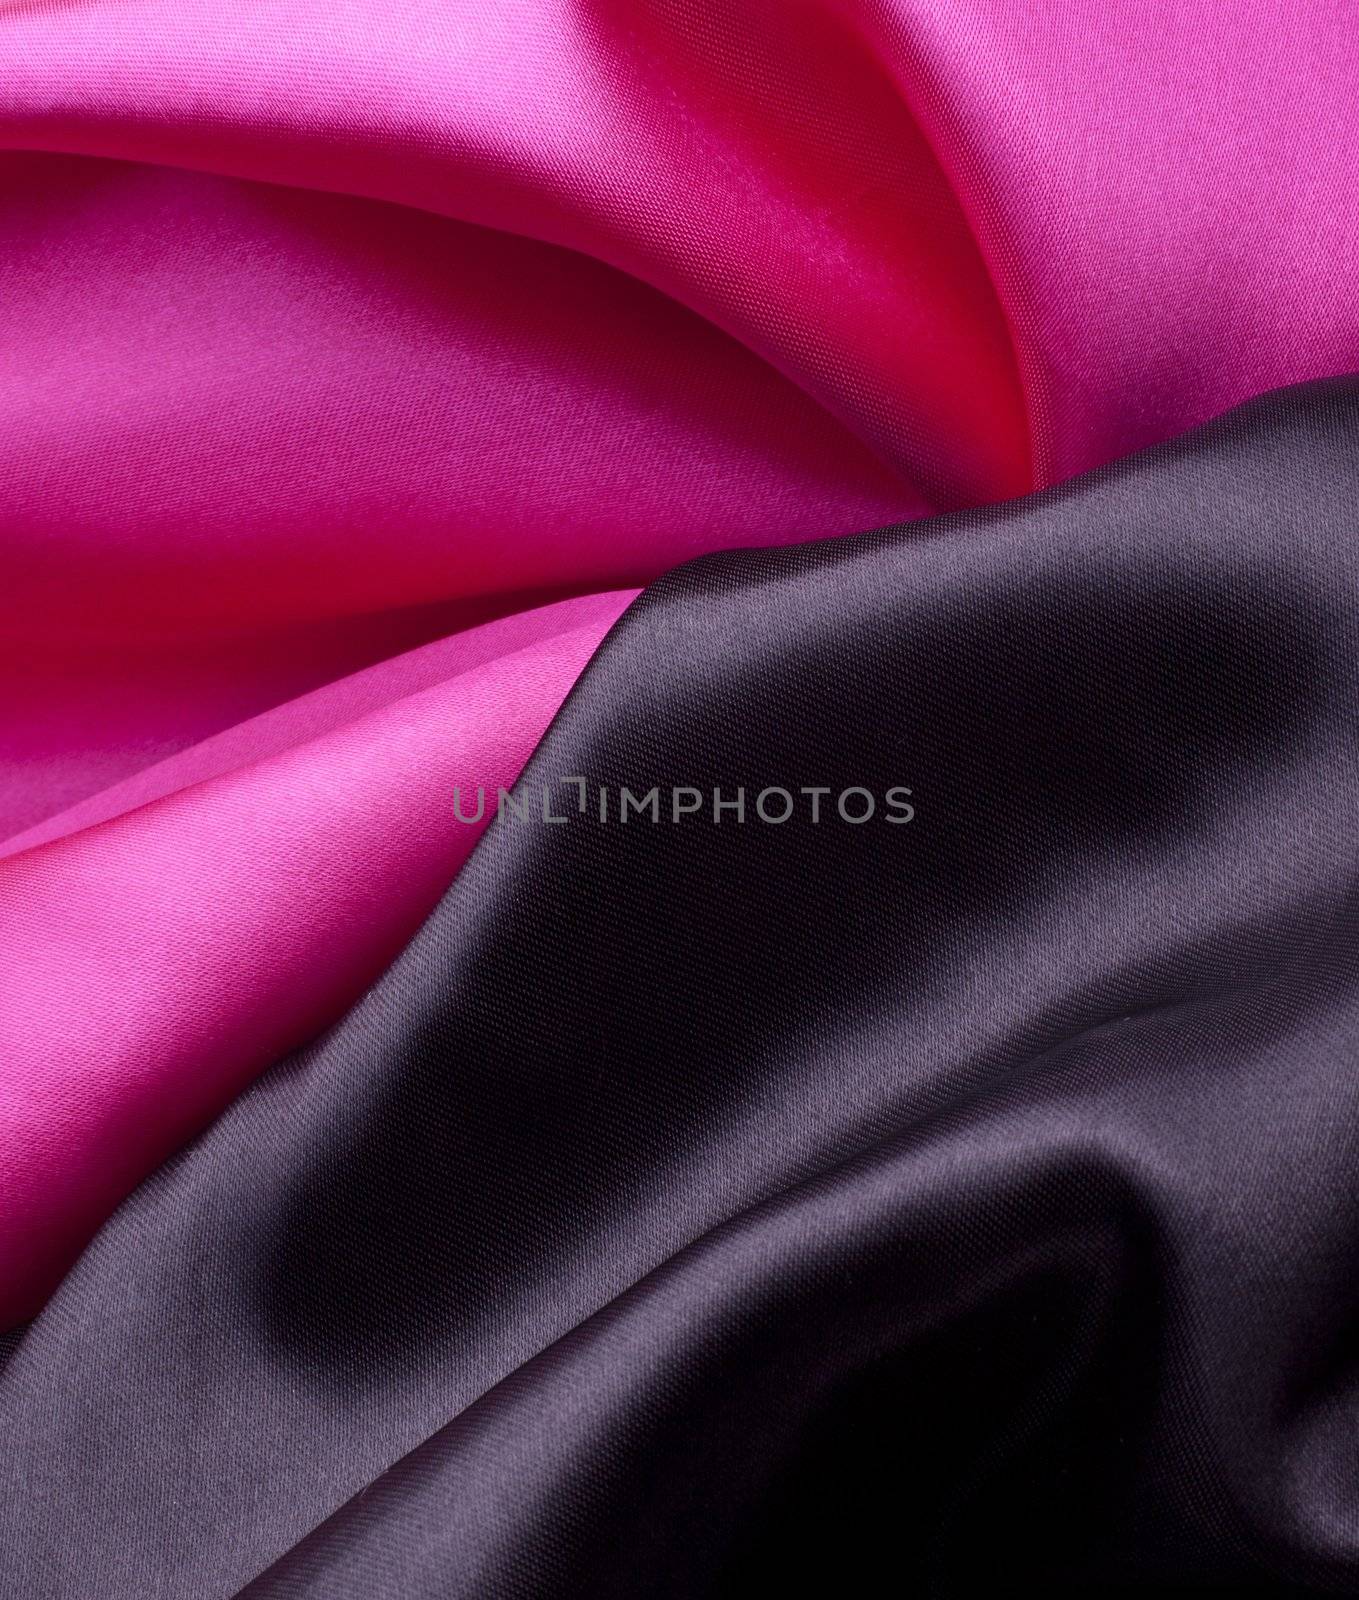 black with pink satin